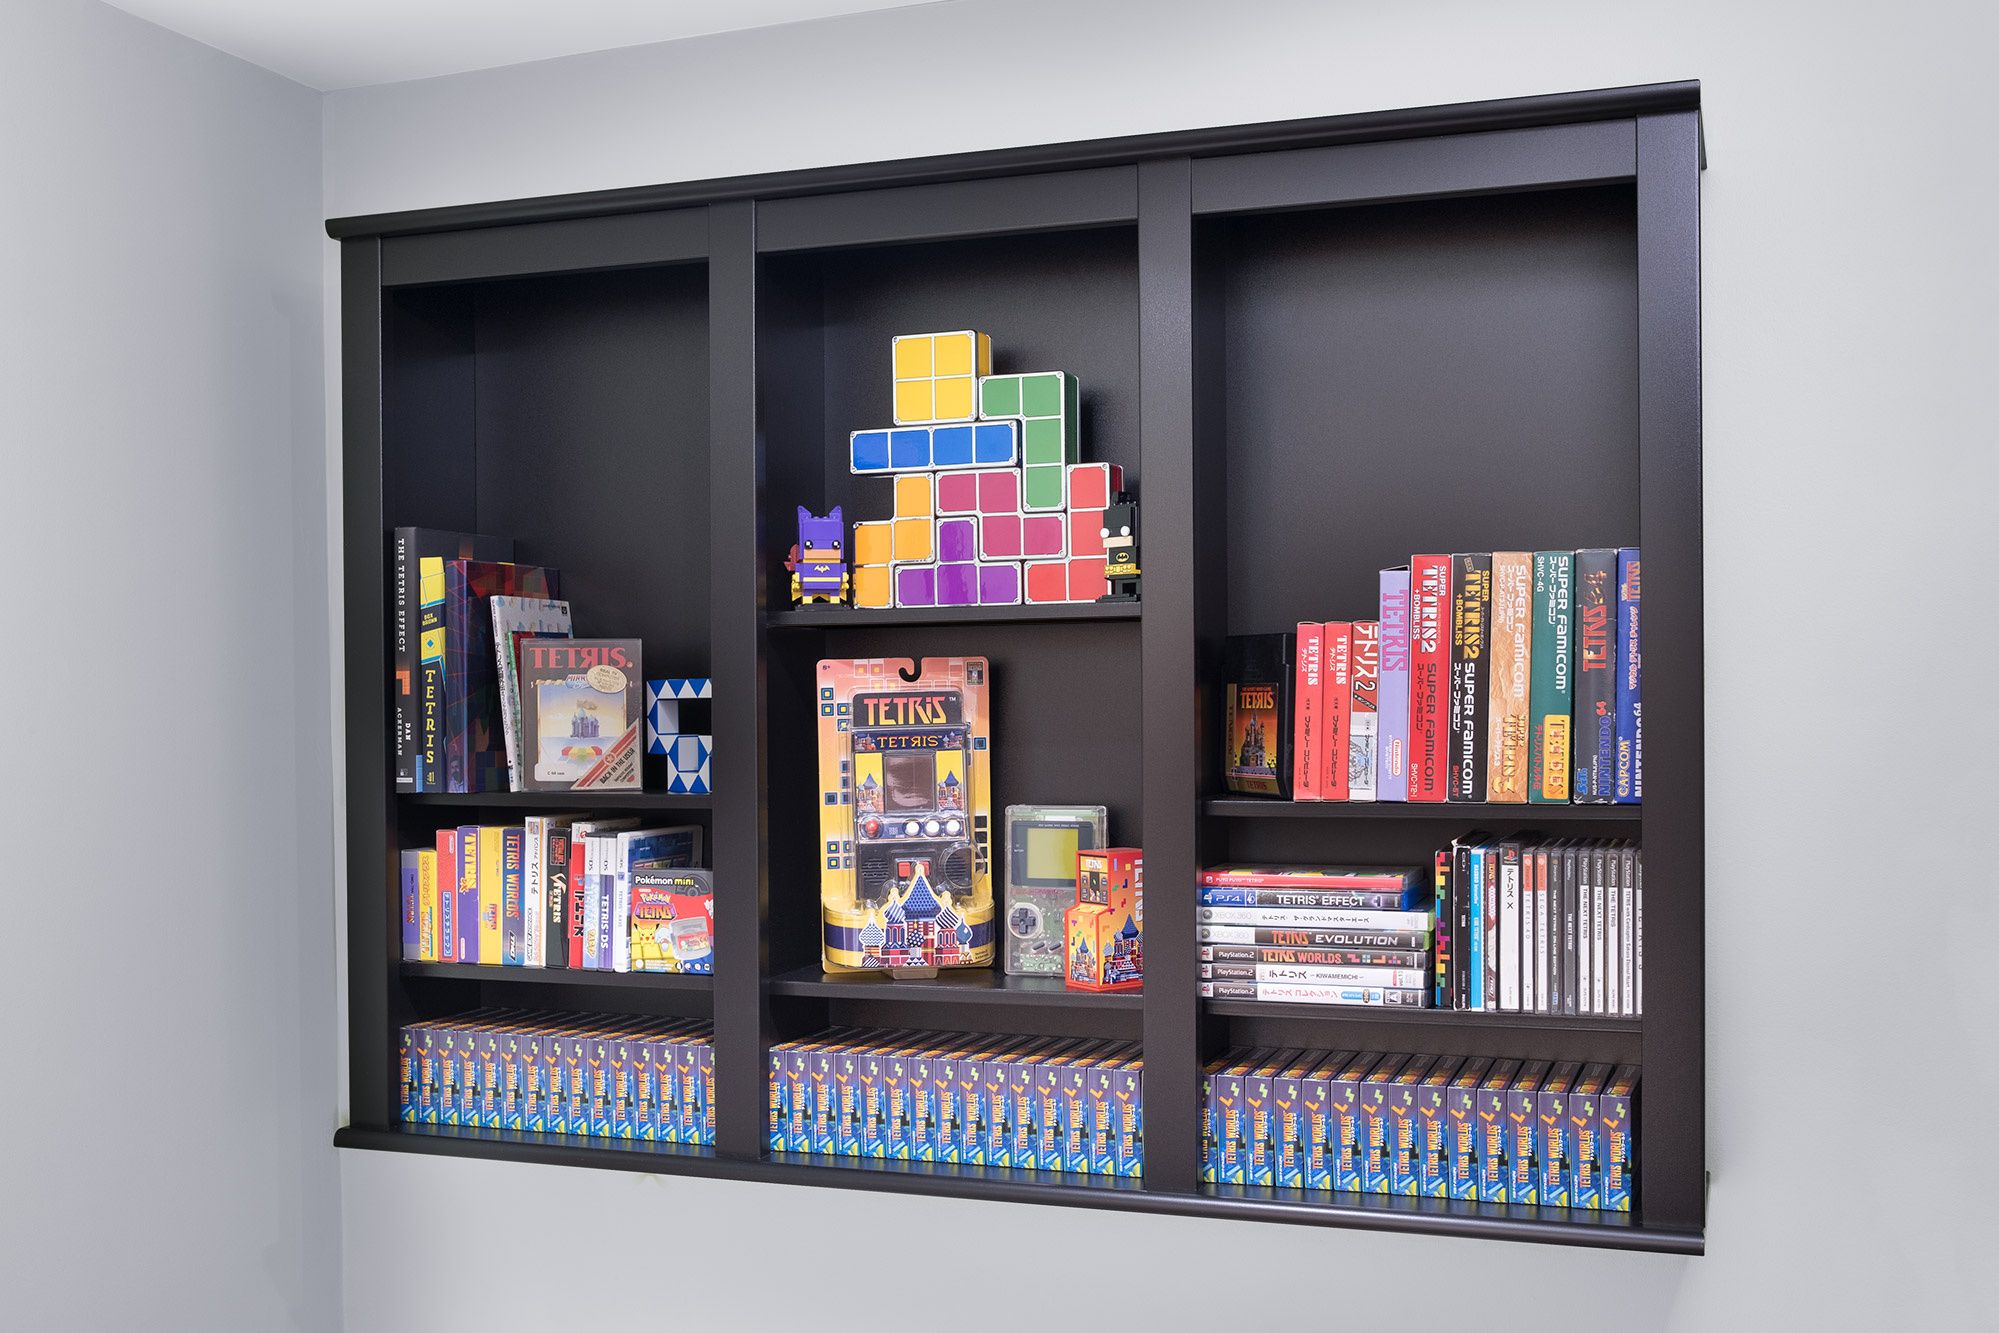 A black shelf mounted to a wall with three large vertical sections which are divided into subsections. On the shelves are various Tetris games and Tetris related collectables.